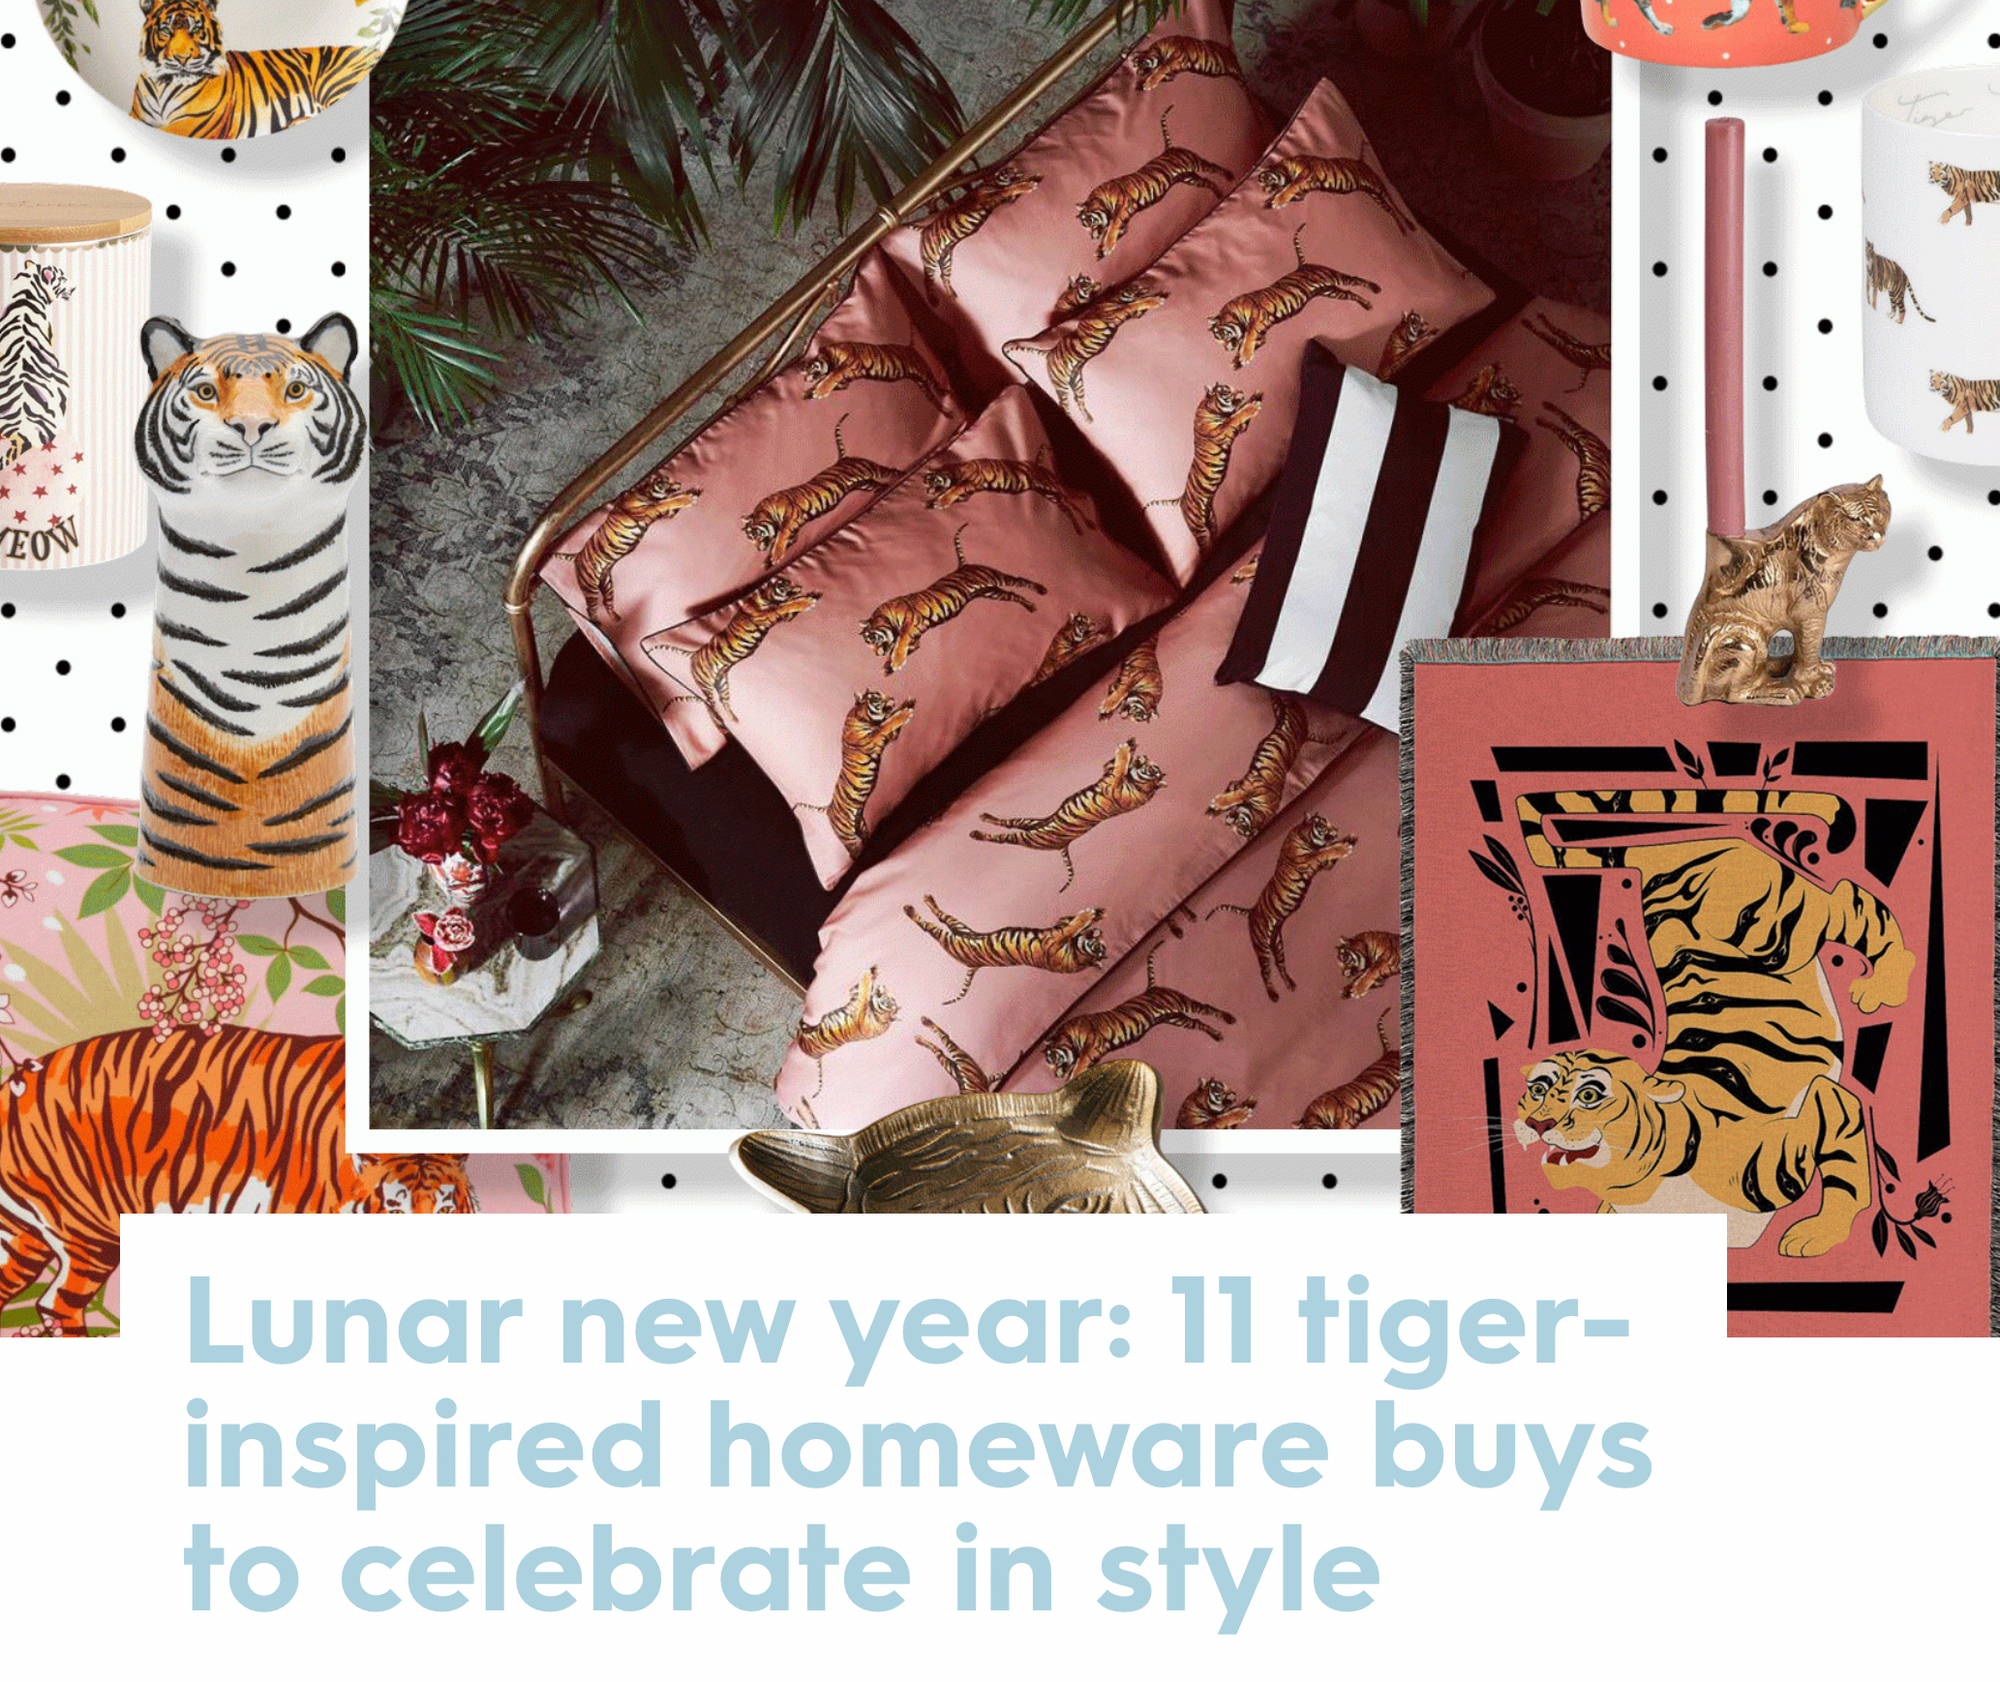 STYLIST: Lunar new year: 11 tiger-inspired homeware buys to celebrate in style